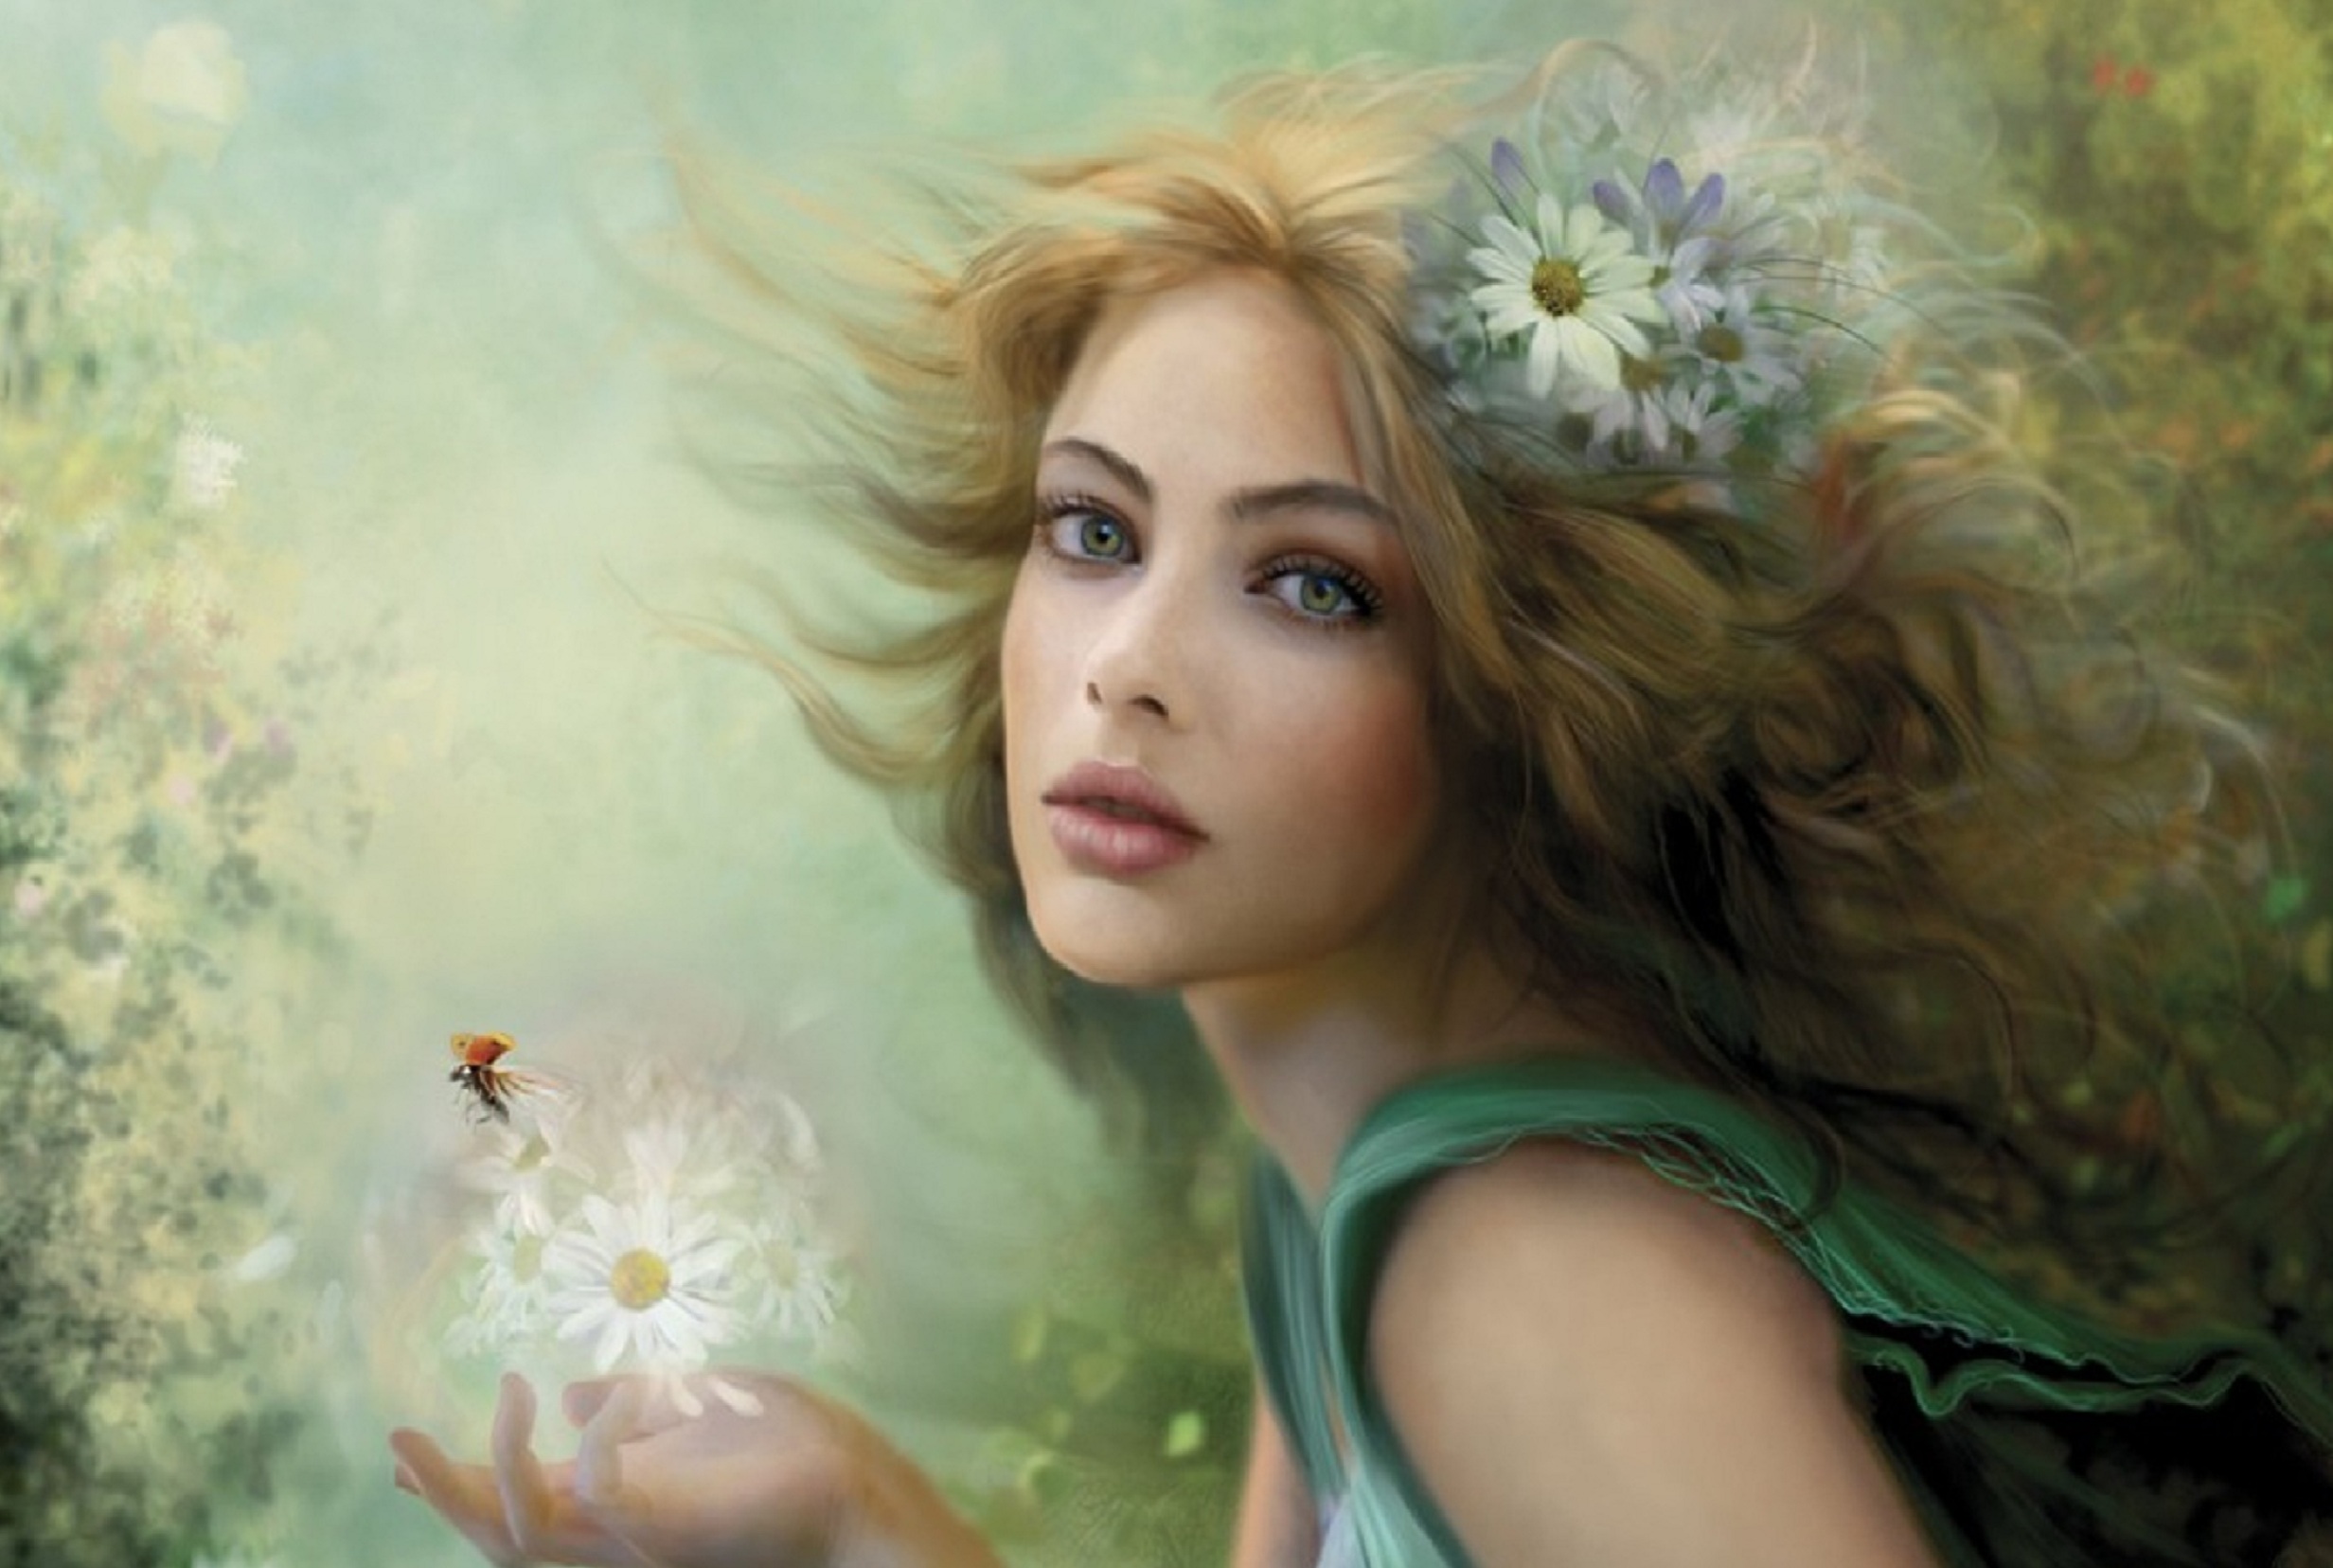 the fairy woman Wallpaper Background | 26692